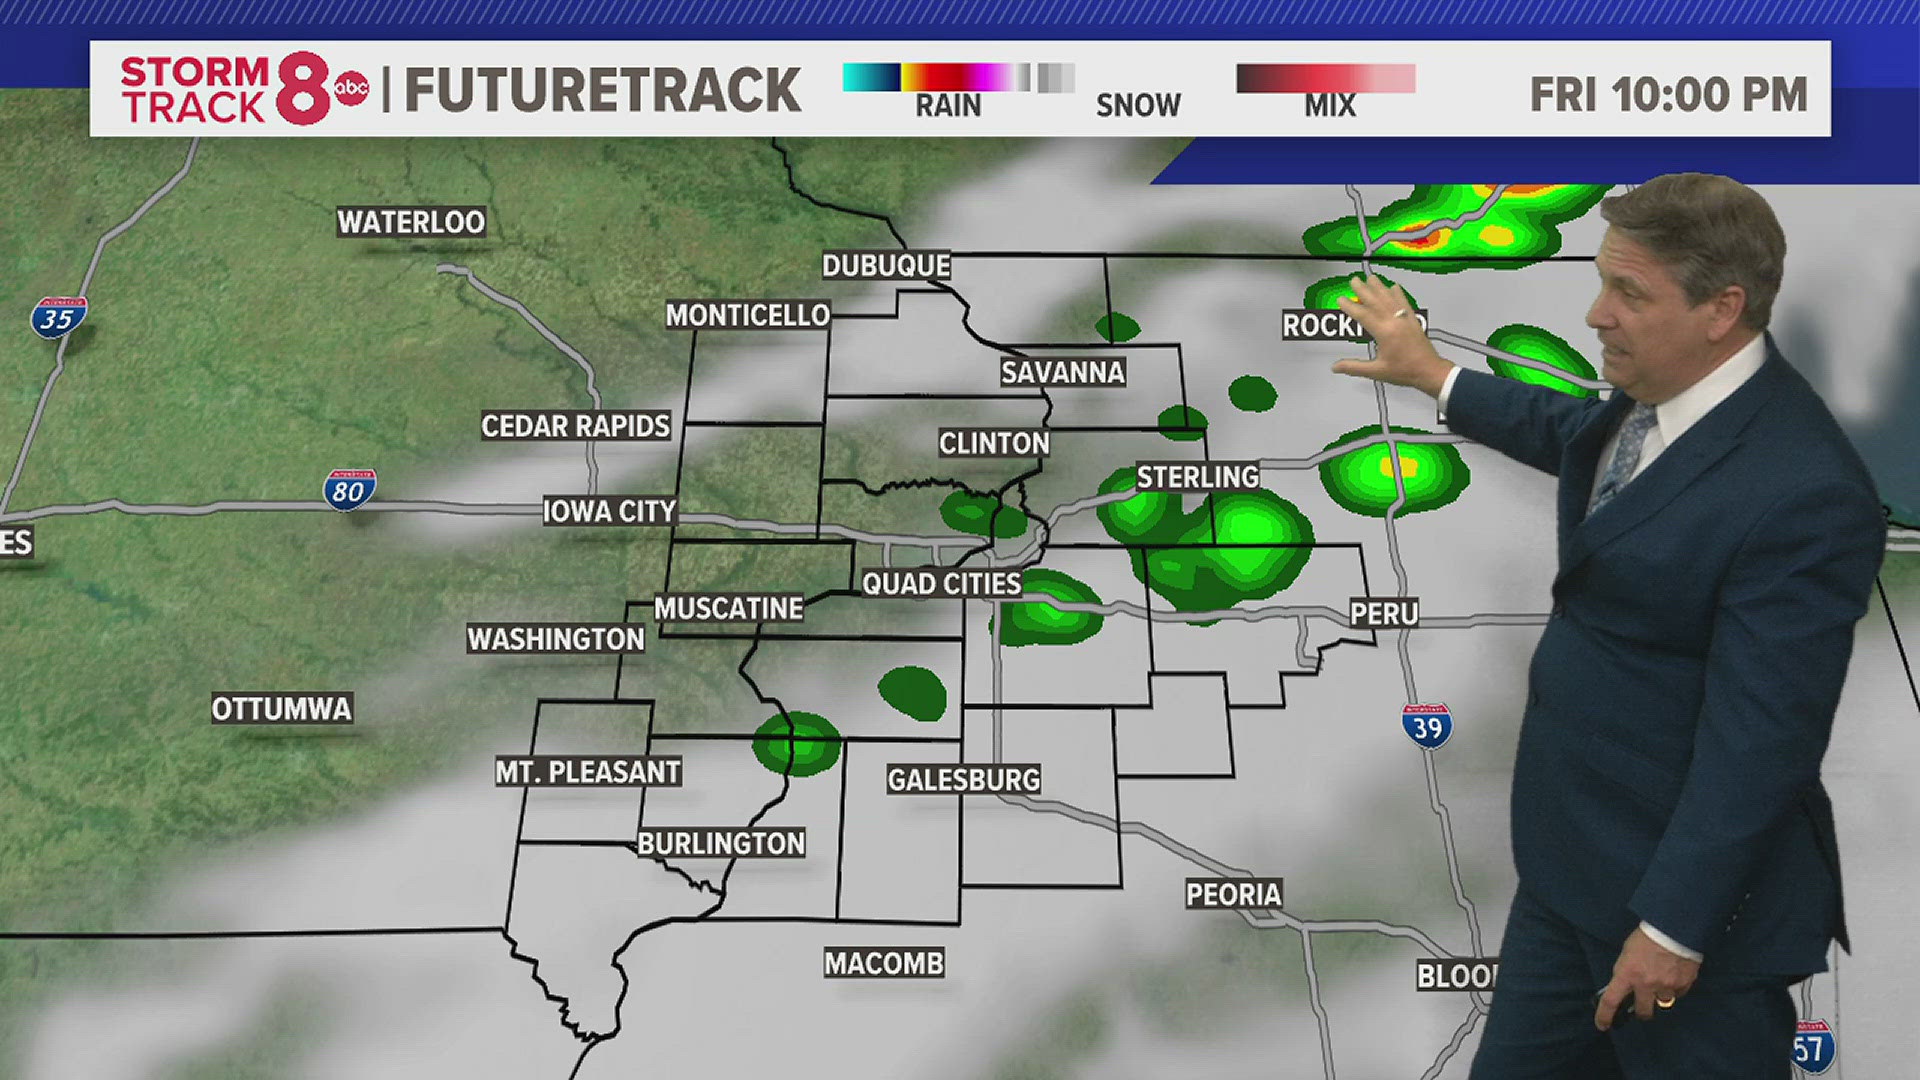 Shower possible later evening... Fabulous weekend